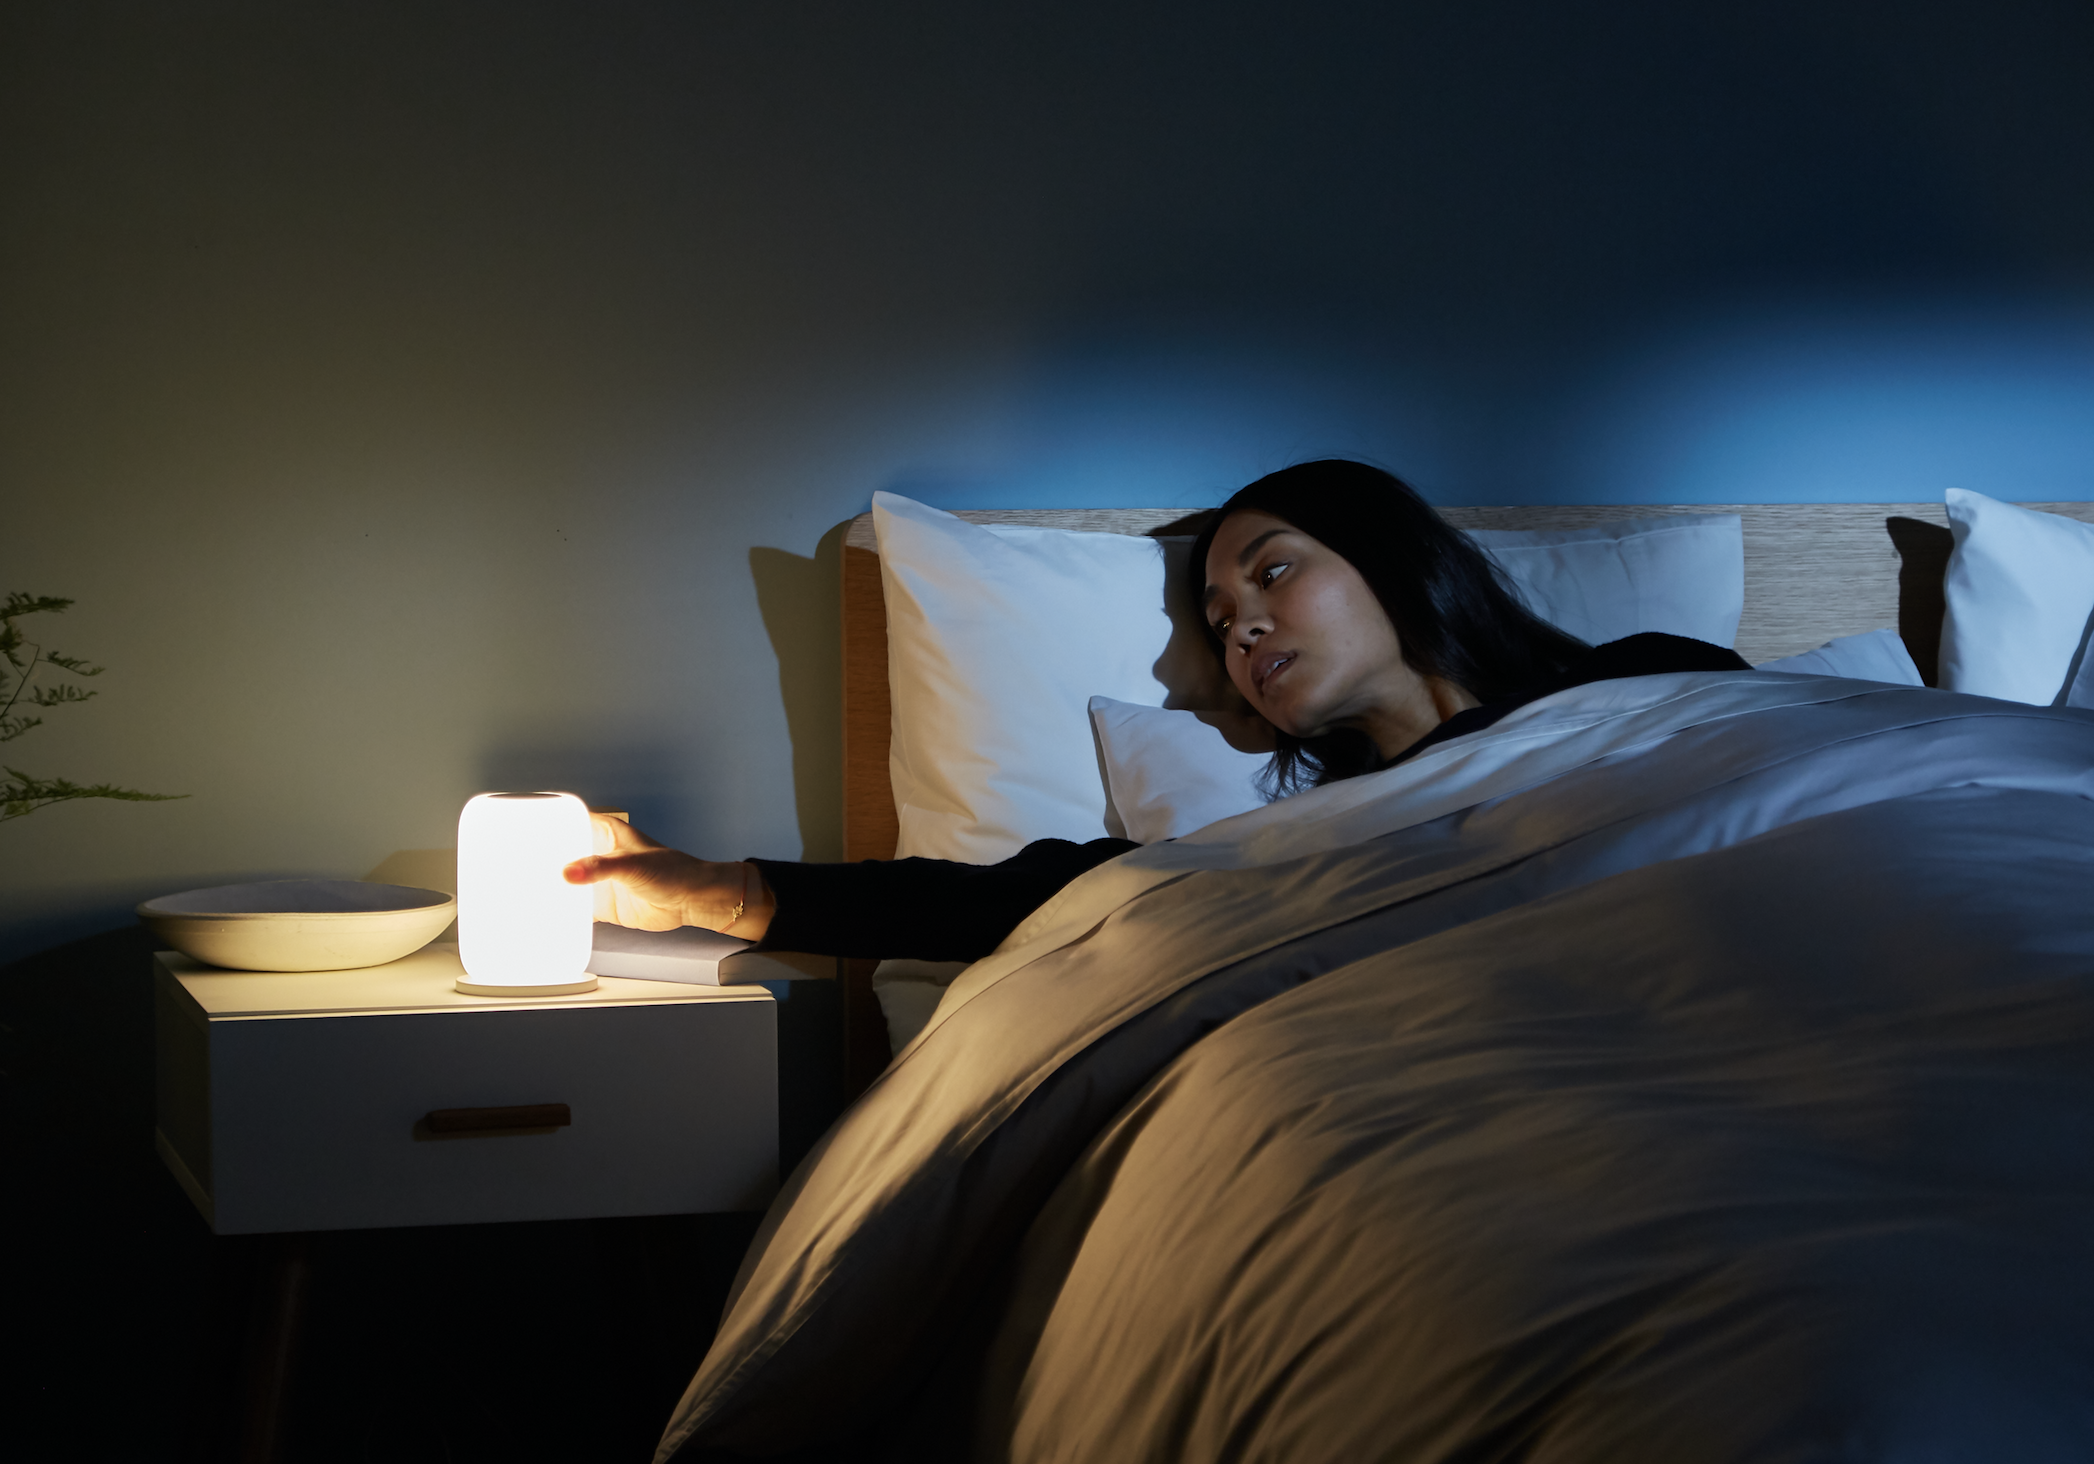 The New Casper Glow Is A Light Designed To You Fall Asleep